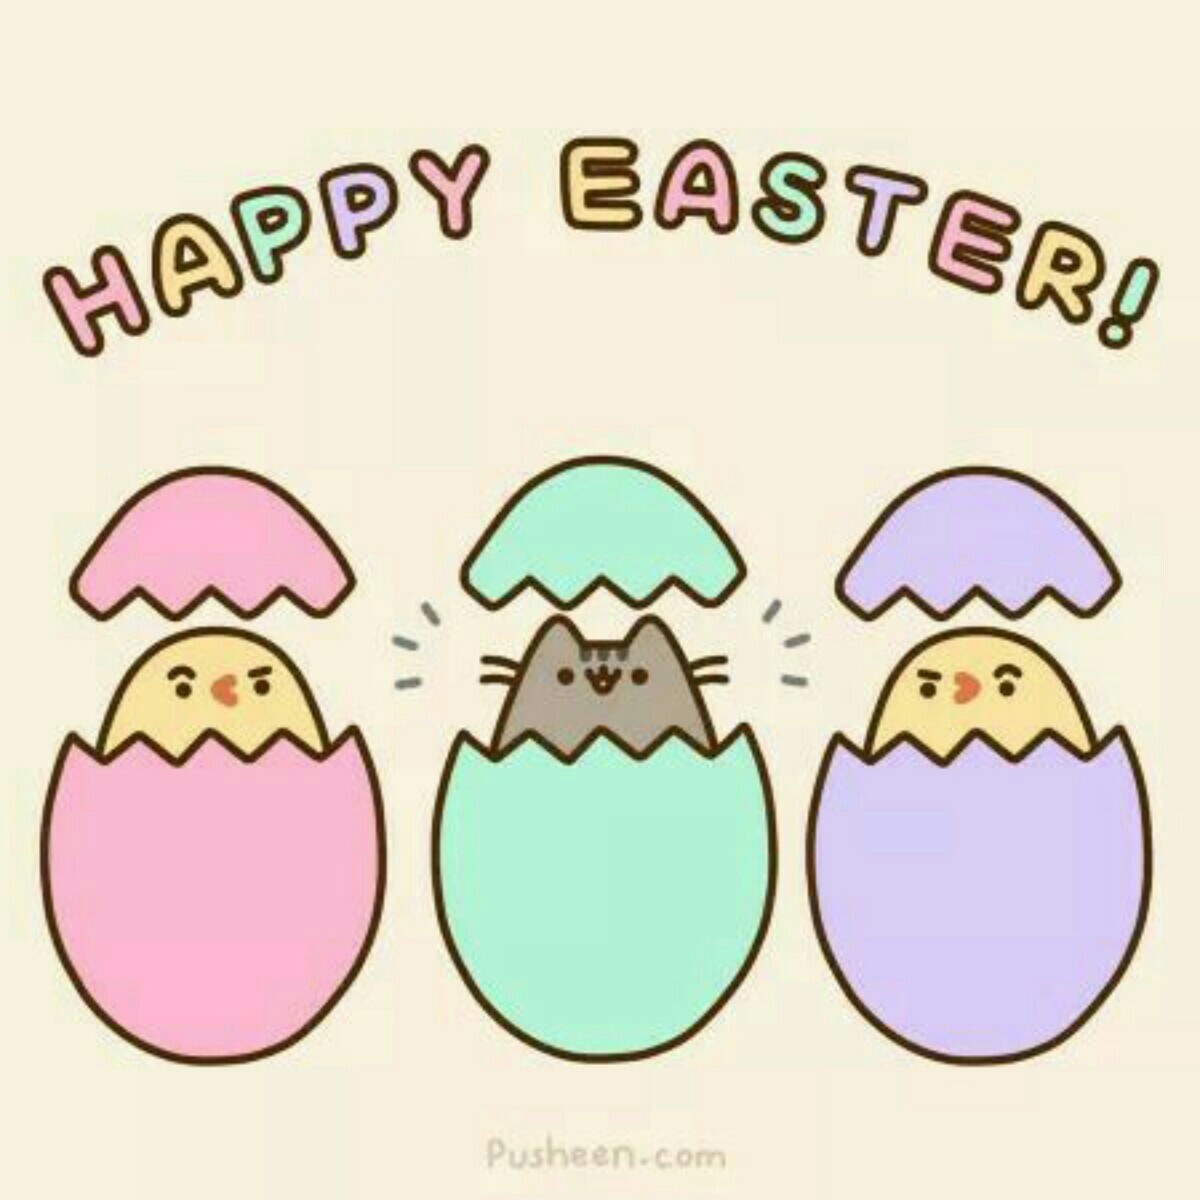 CLICK HERE
happy easter! #pconly